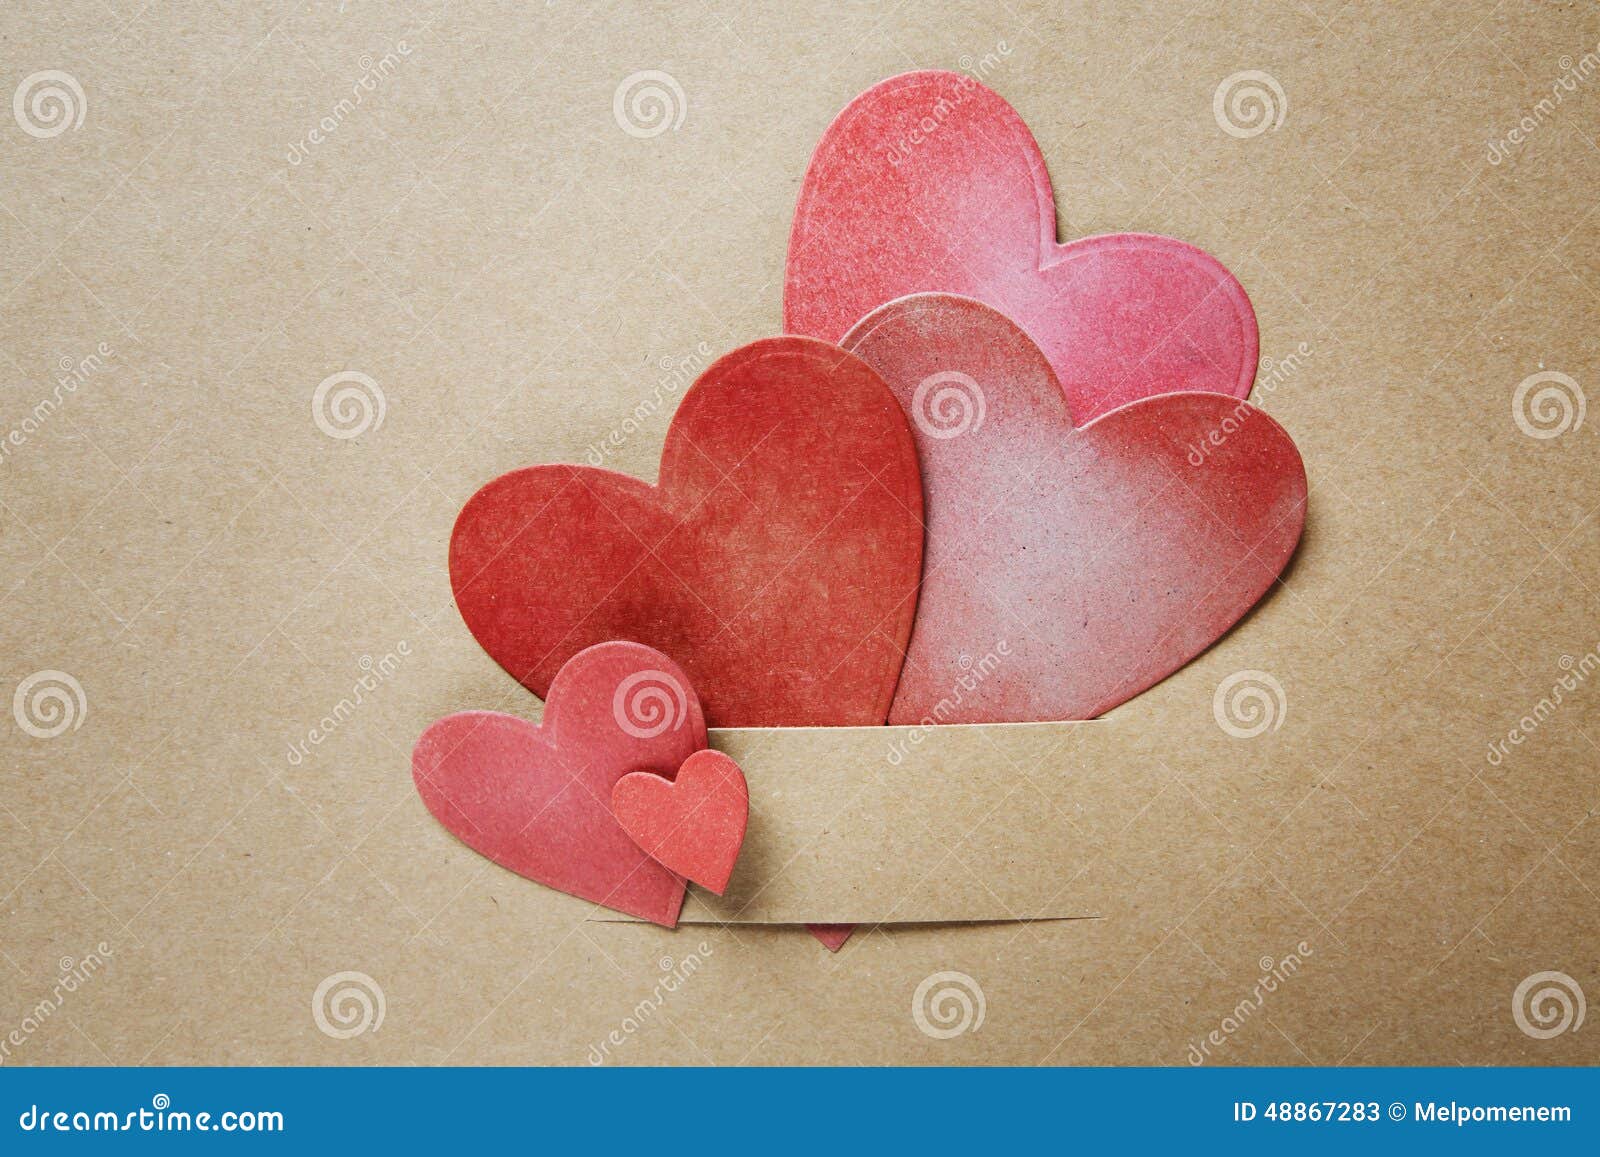 hand-crafted paper hearts